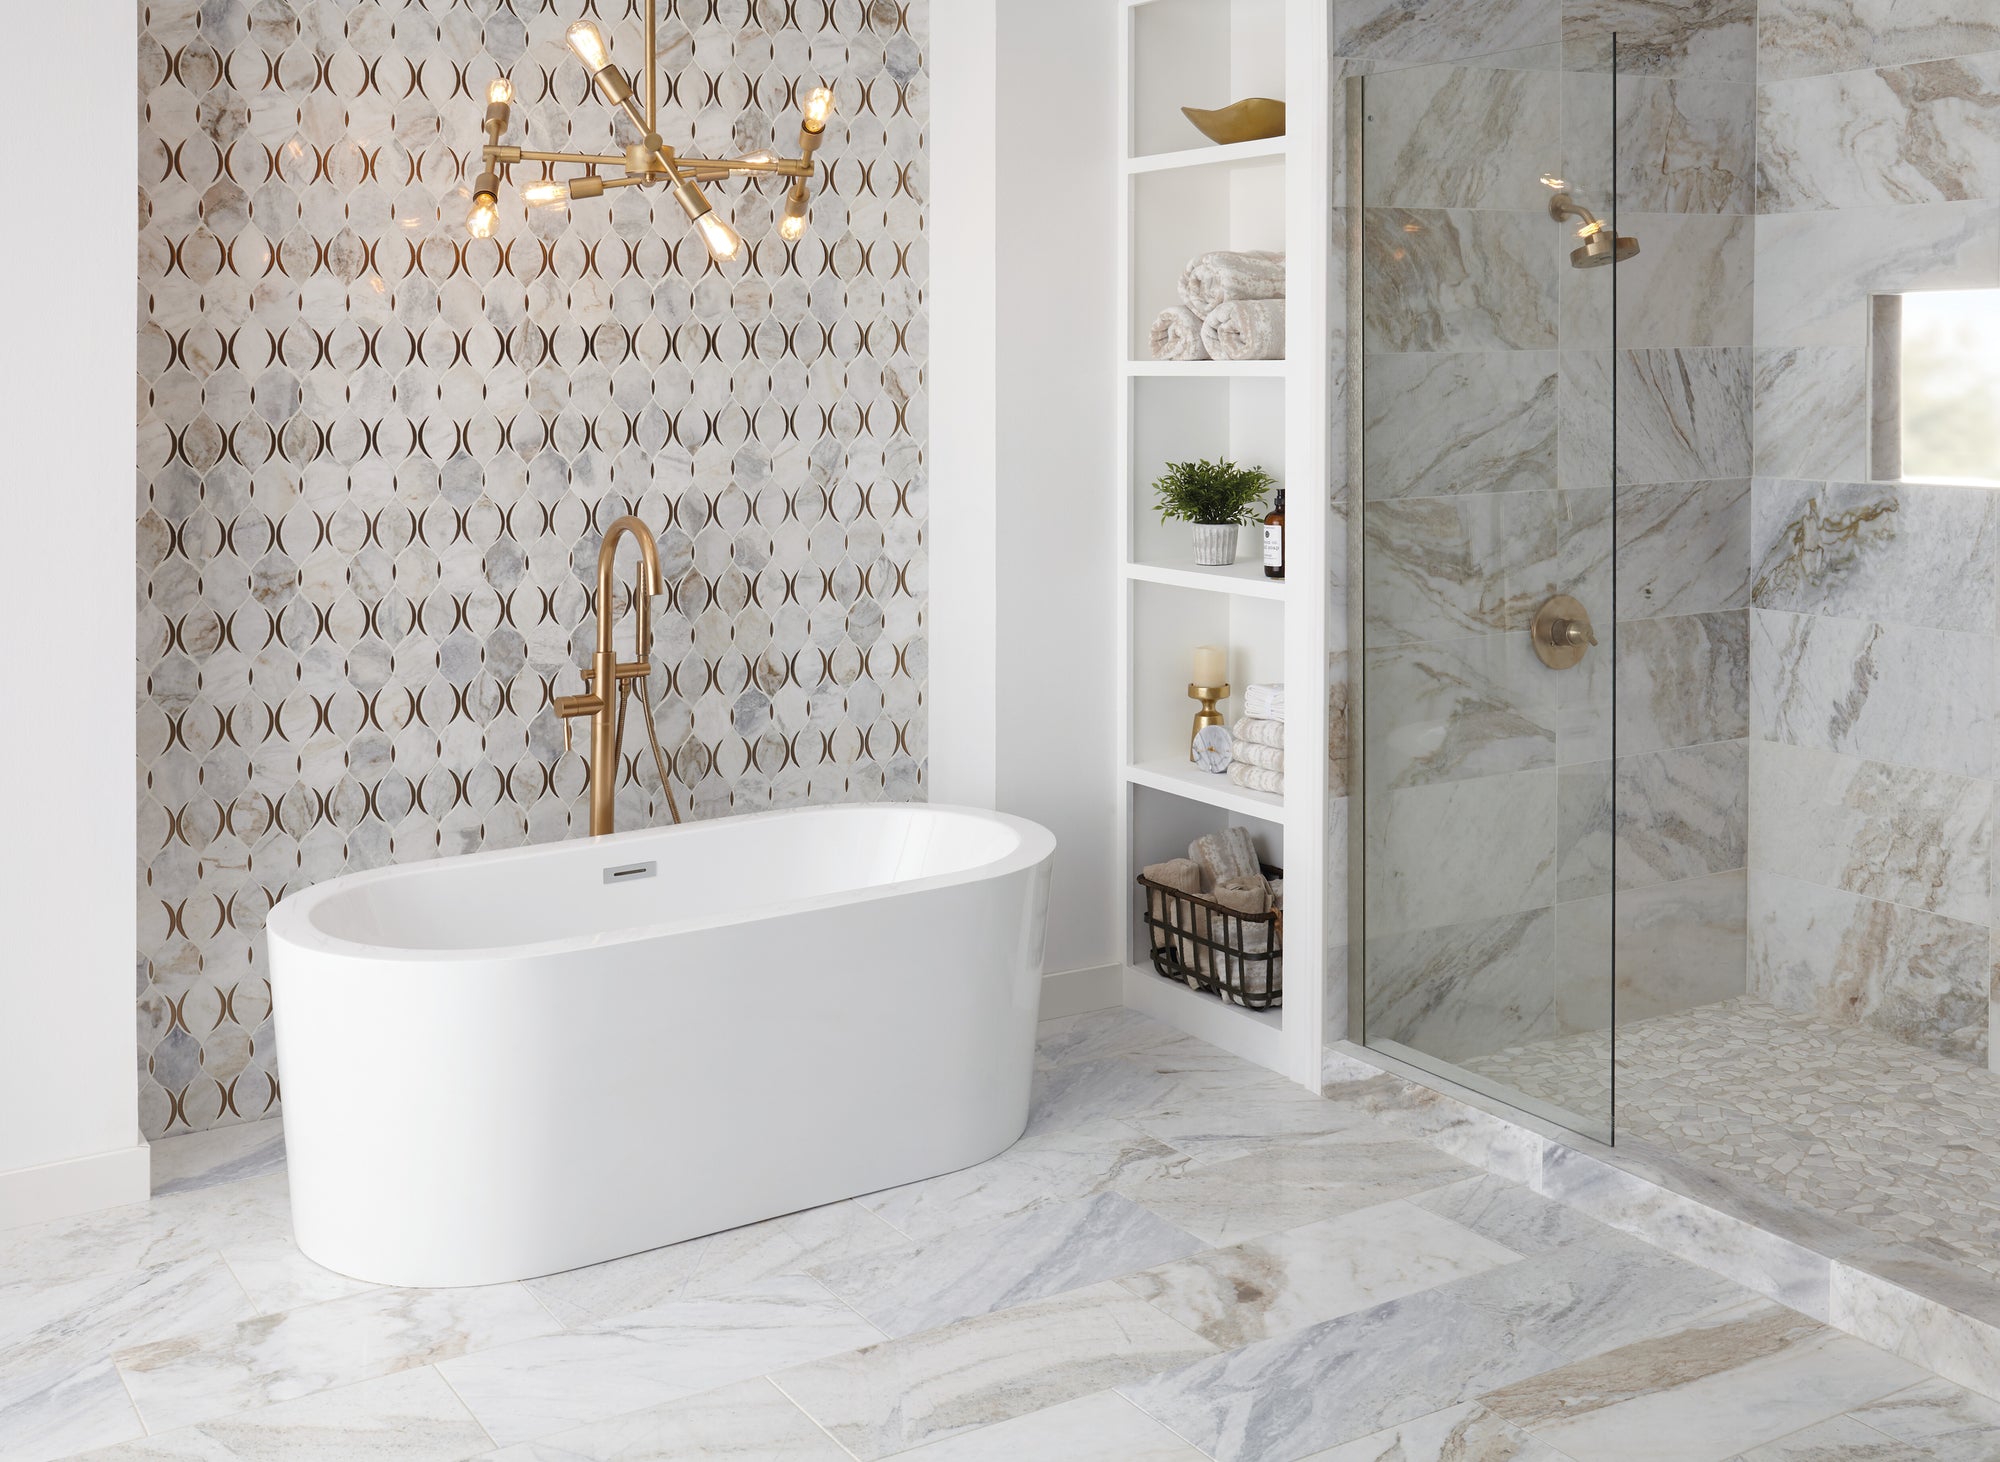 How To Mix Different Tile Styles